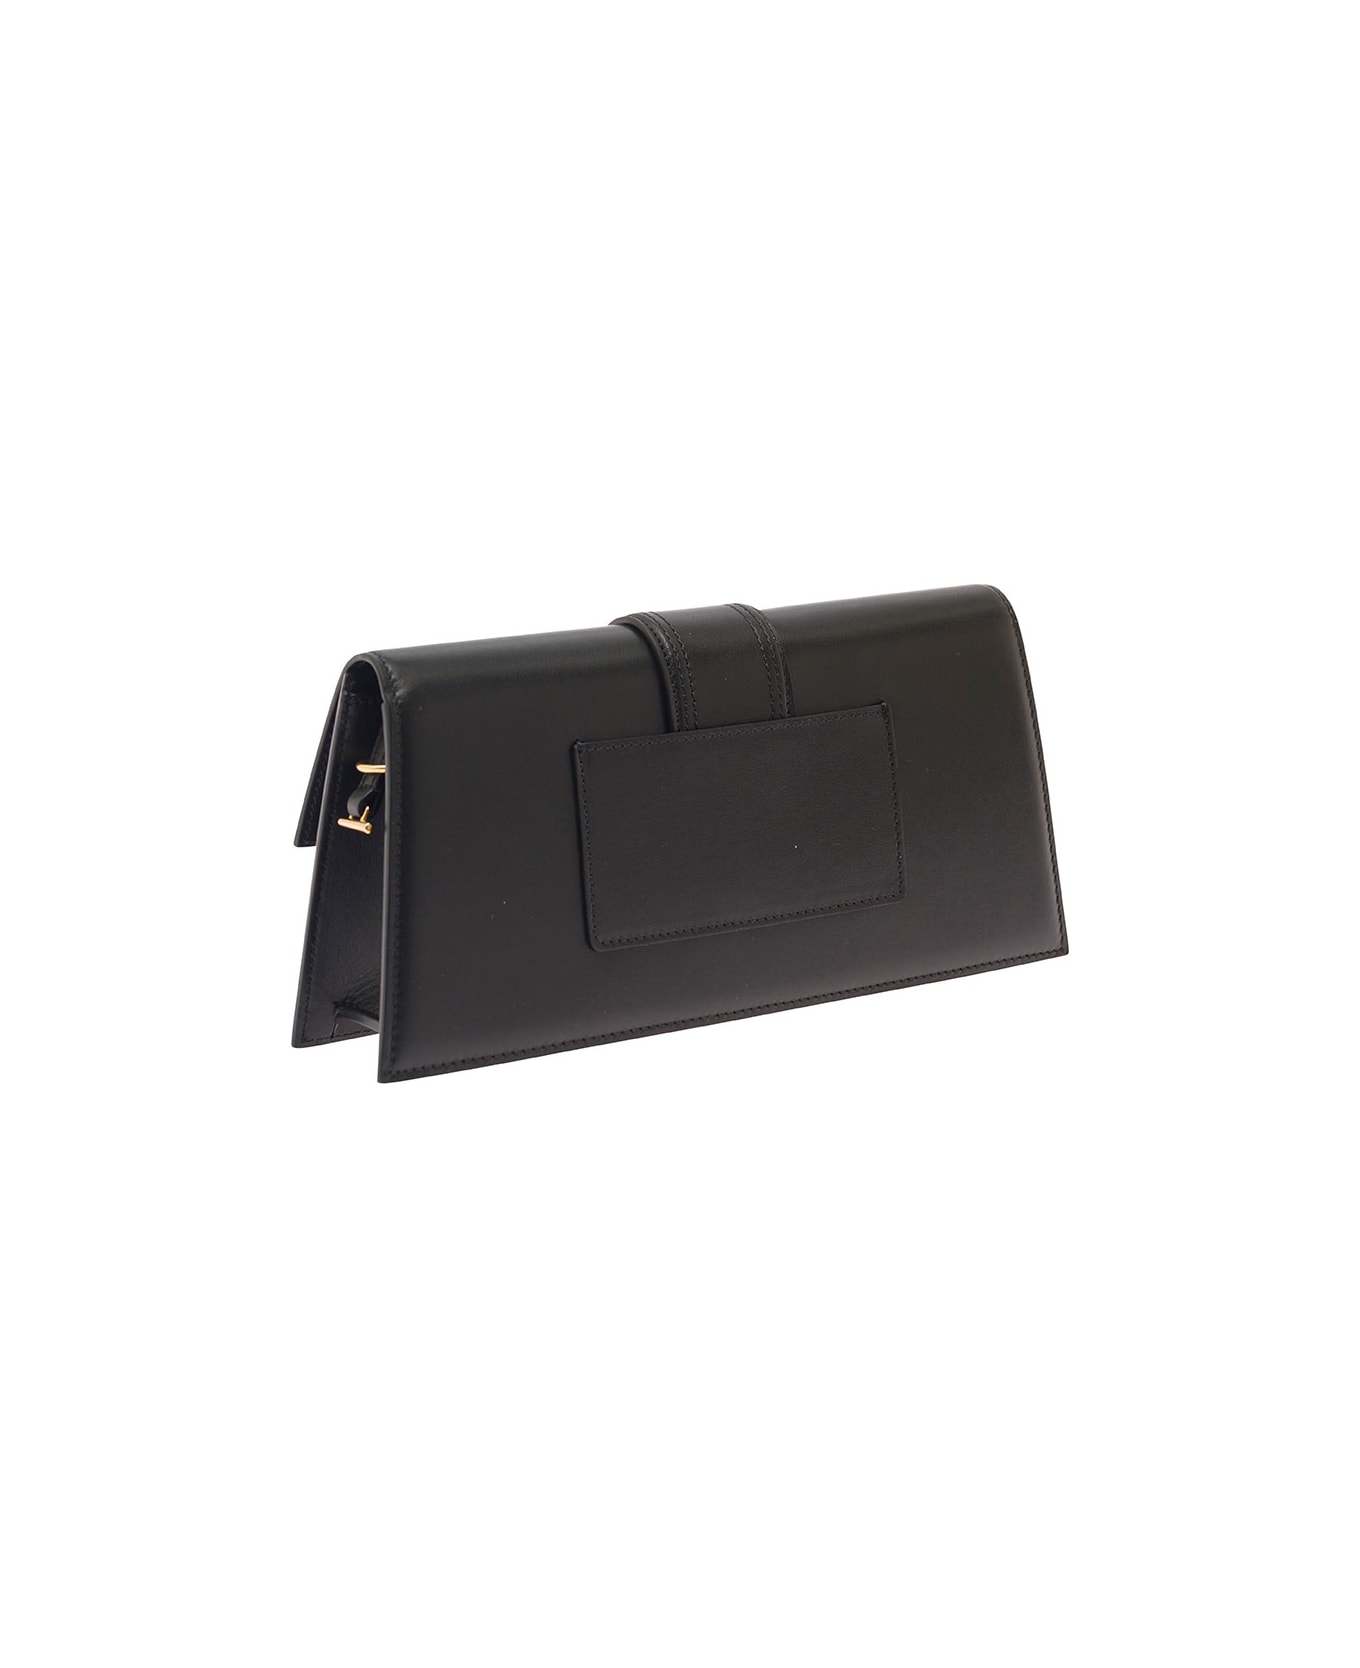 Jacquemus 'le Bambino Long' Black Handbag With Removable Shoulder Strap In Leather Woman - Black